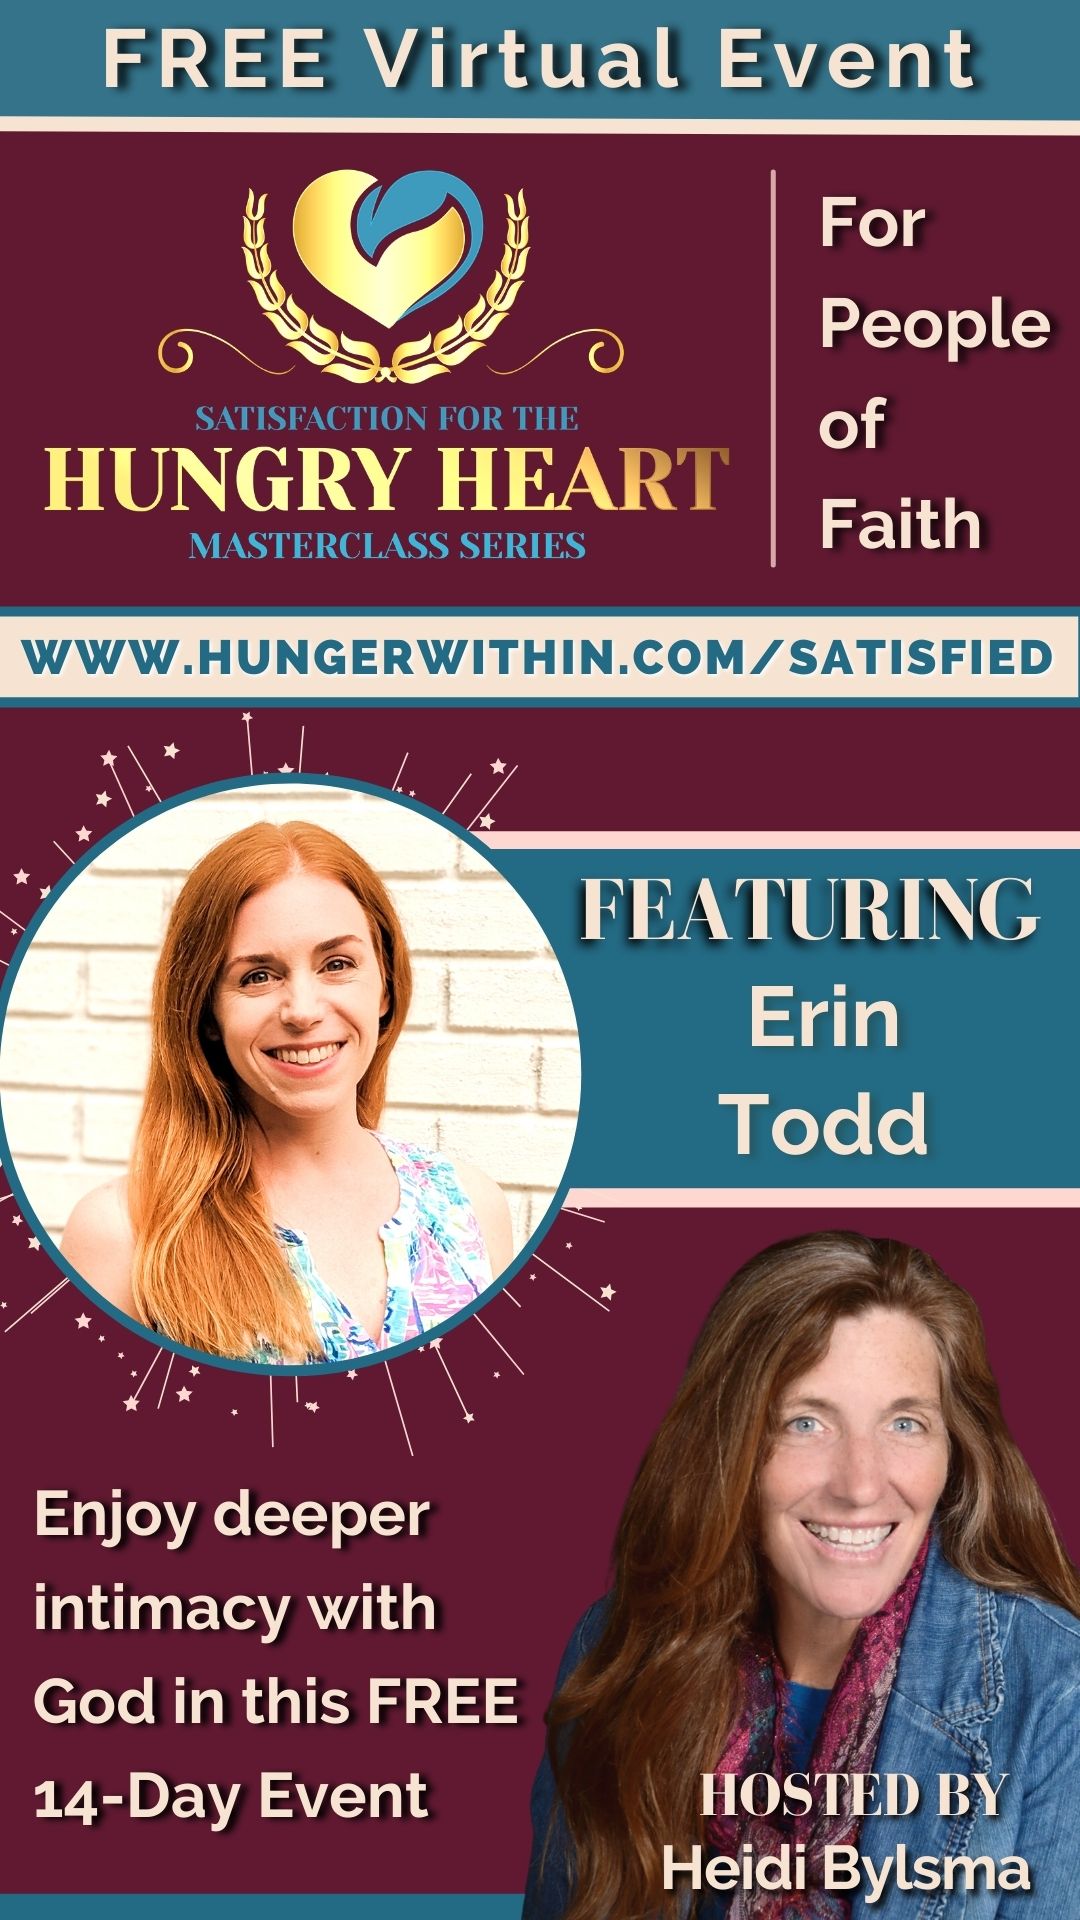 Satisfaction for the Hungry Heart Masterclass Series featuring Erin Todd